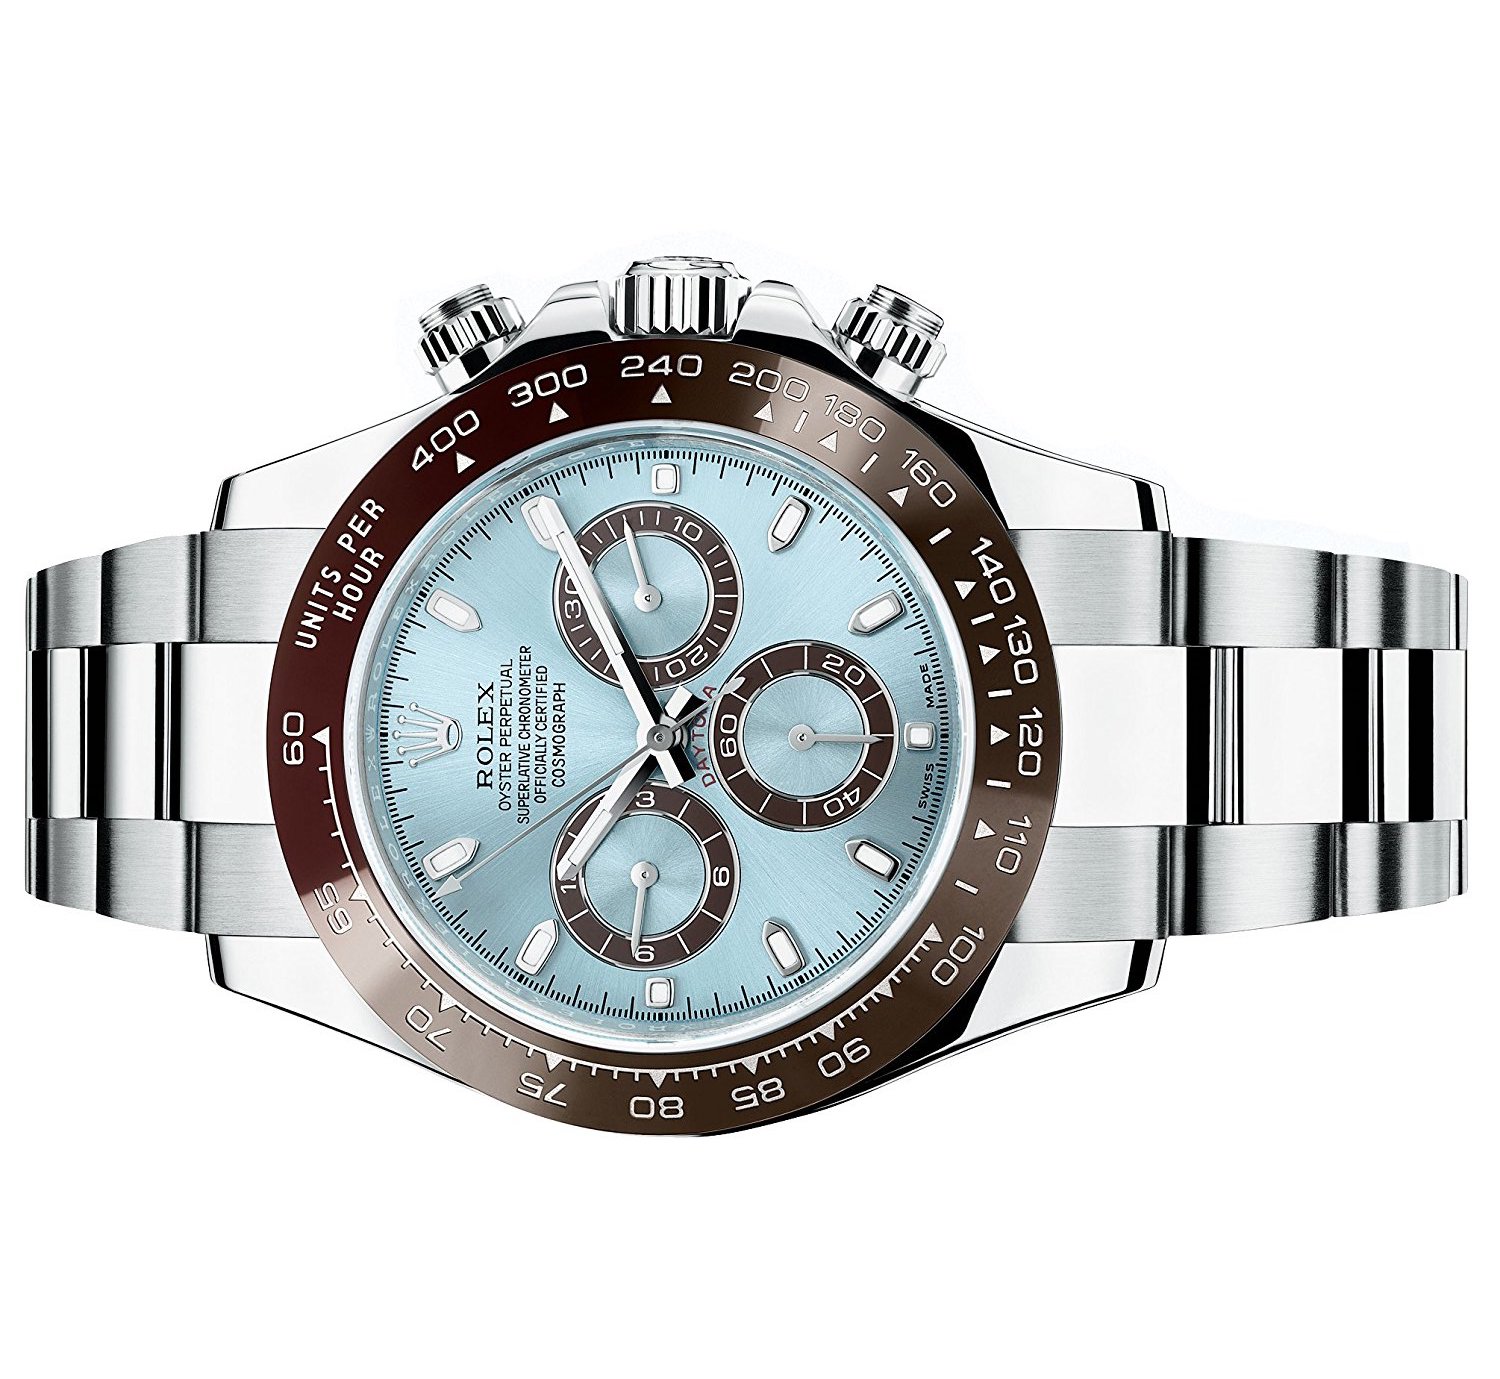 Rolex Platinum Day-Date 40mm Ice Blue Dial - Roman Numerals for $89,580 for  sale from a Seller on Chrono24 | Rolex day date, Rolex, Platinum